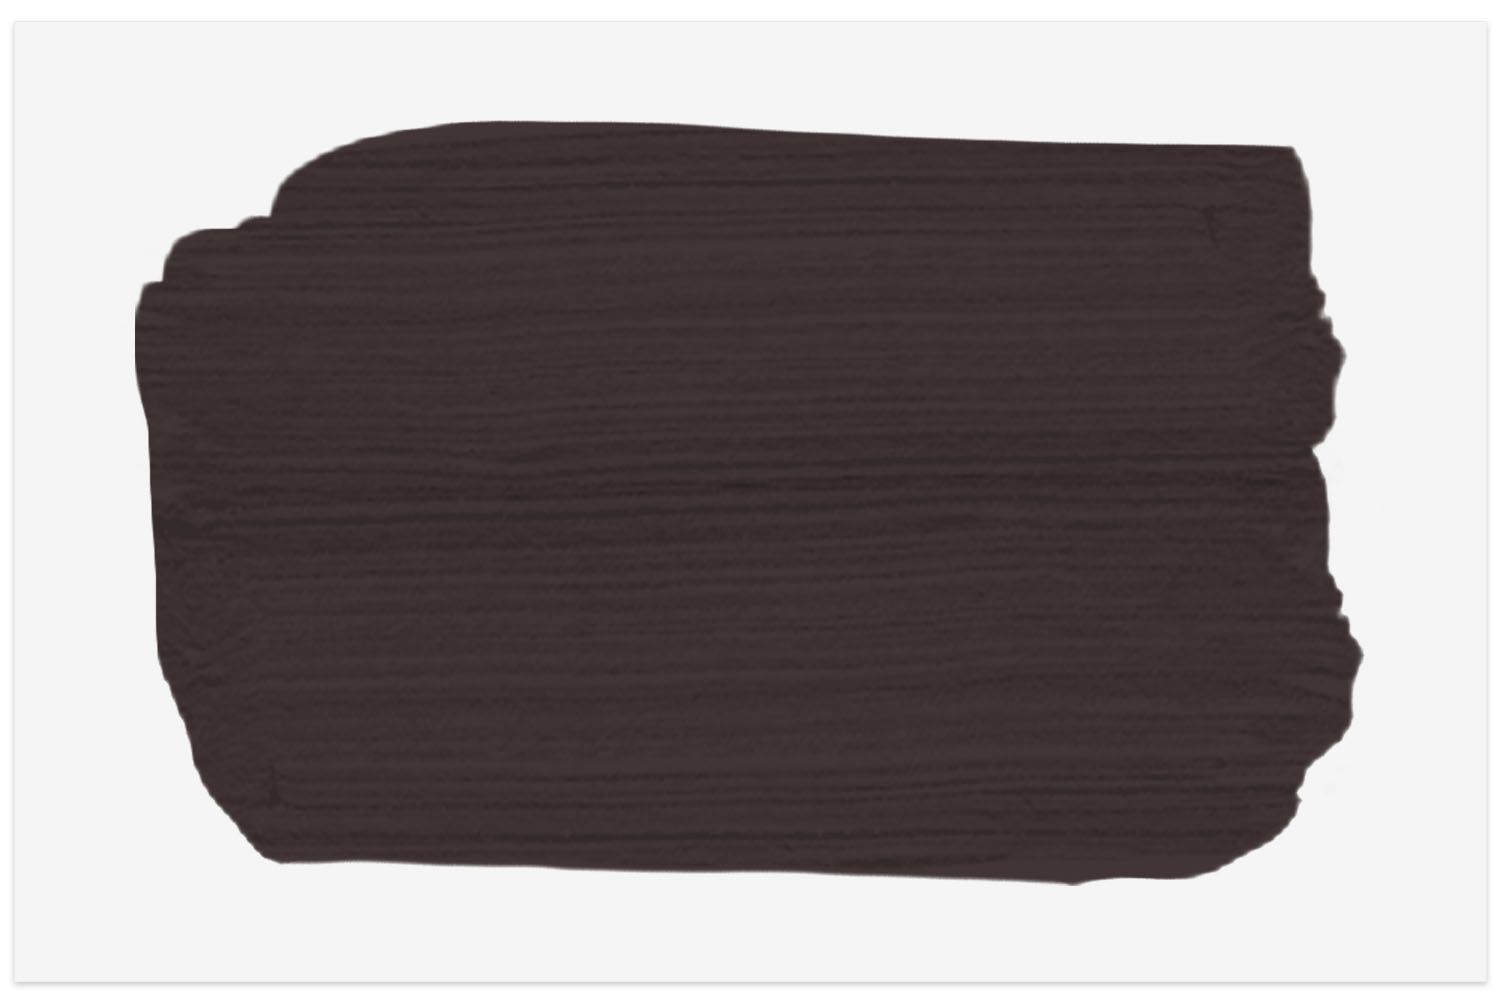 Farrow & Ball's Tanners' Brown paint swatch